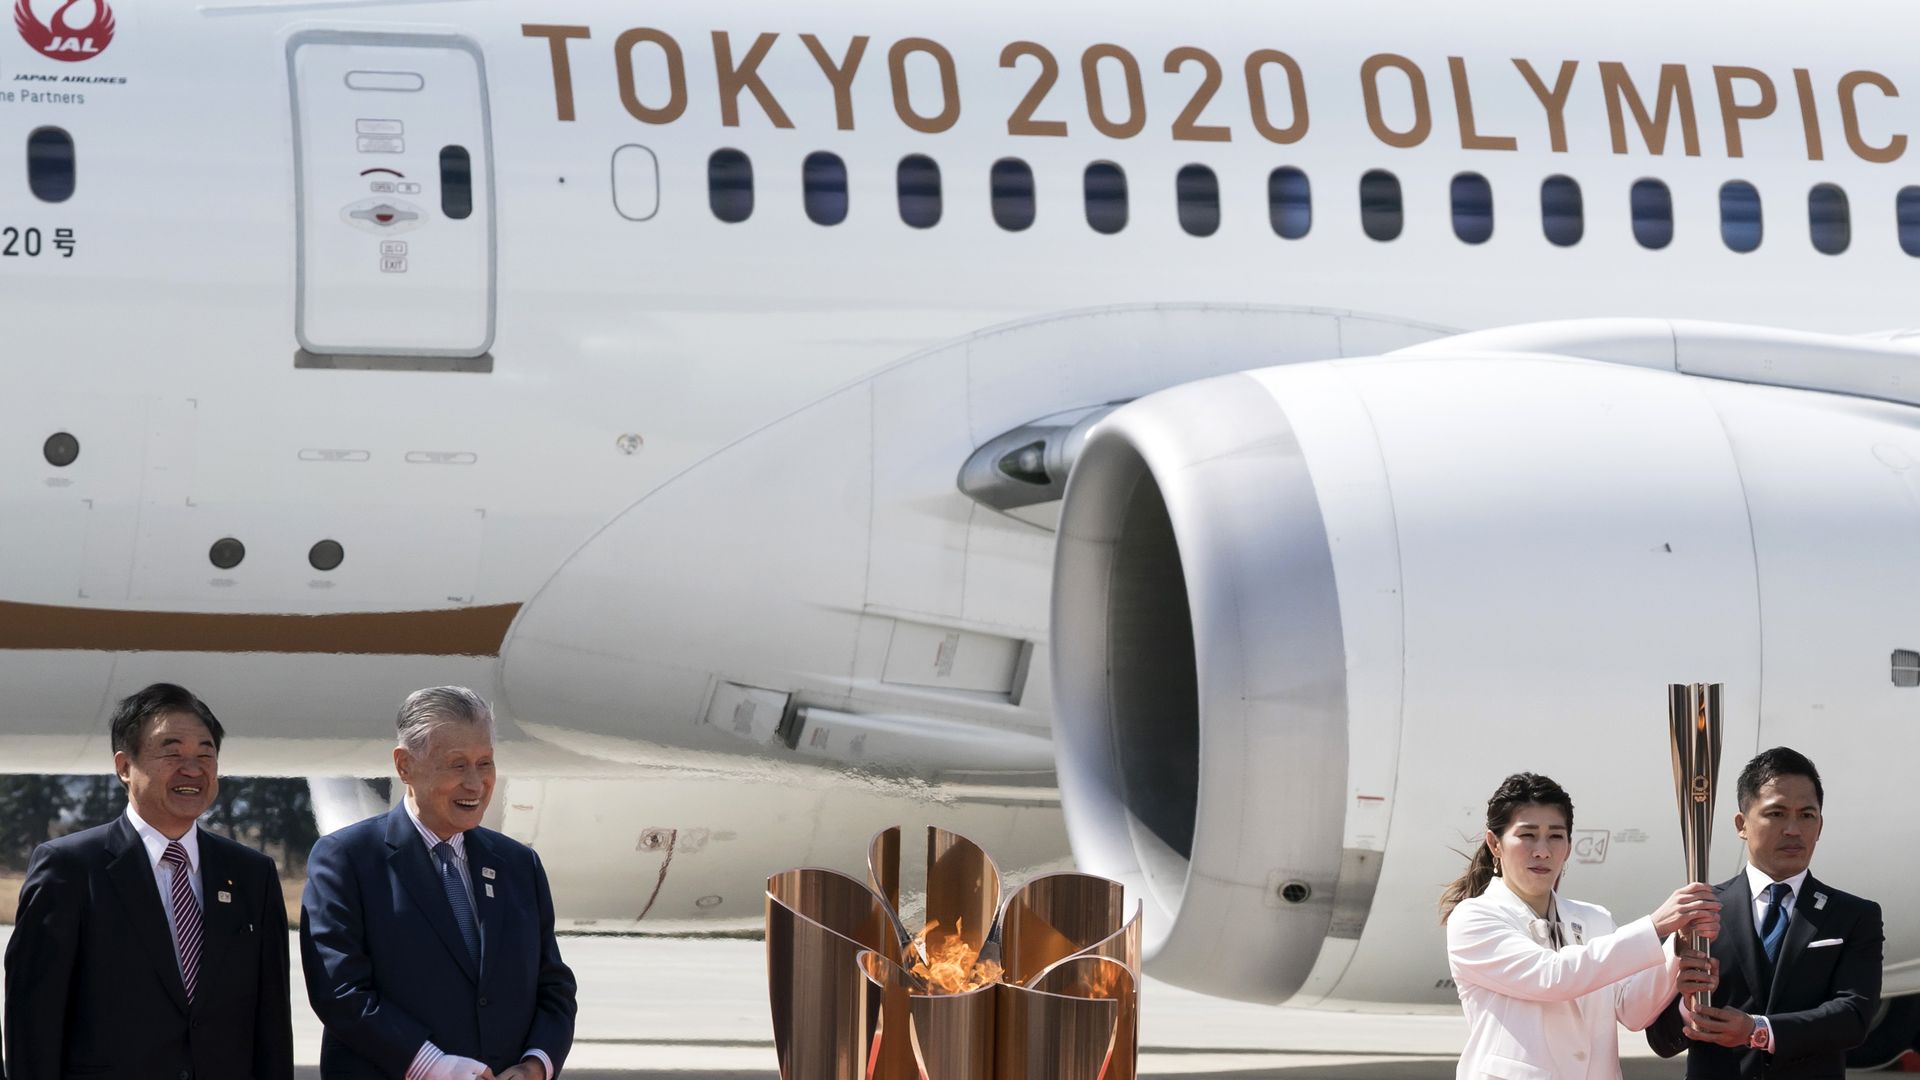 In this image, "Tokyo 2020 Olympics" is written on the side of a plane.